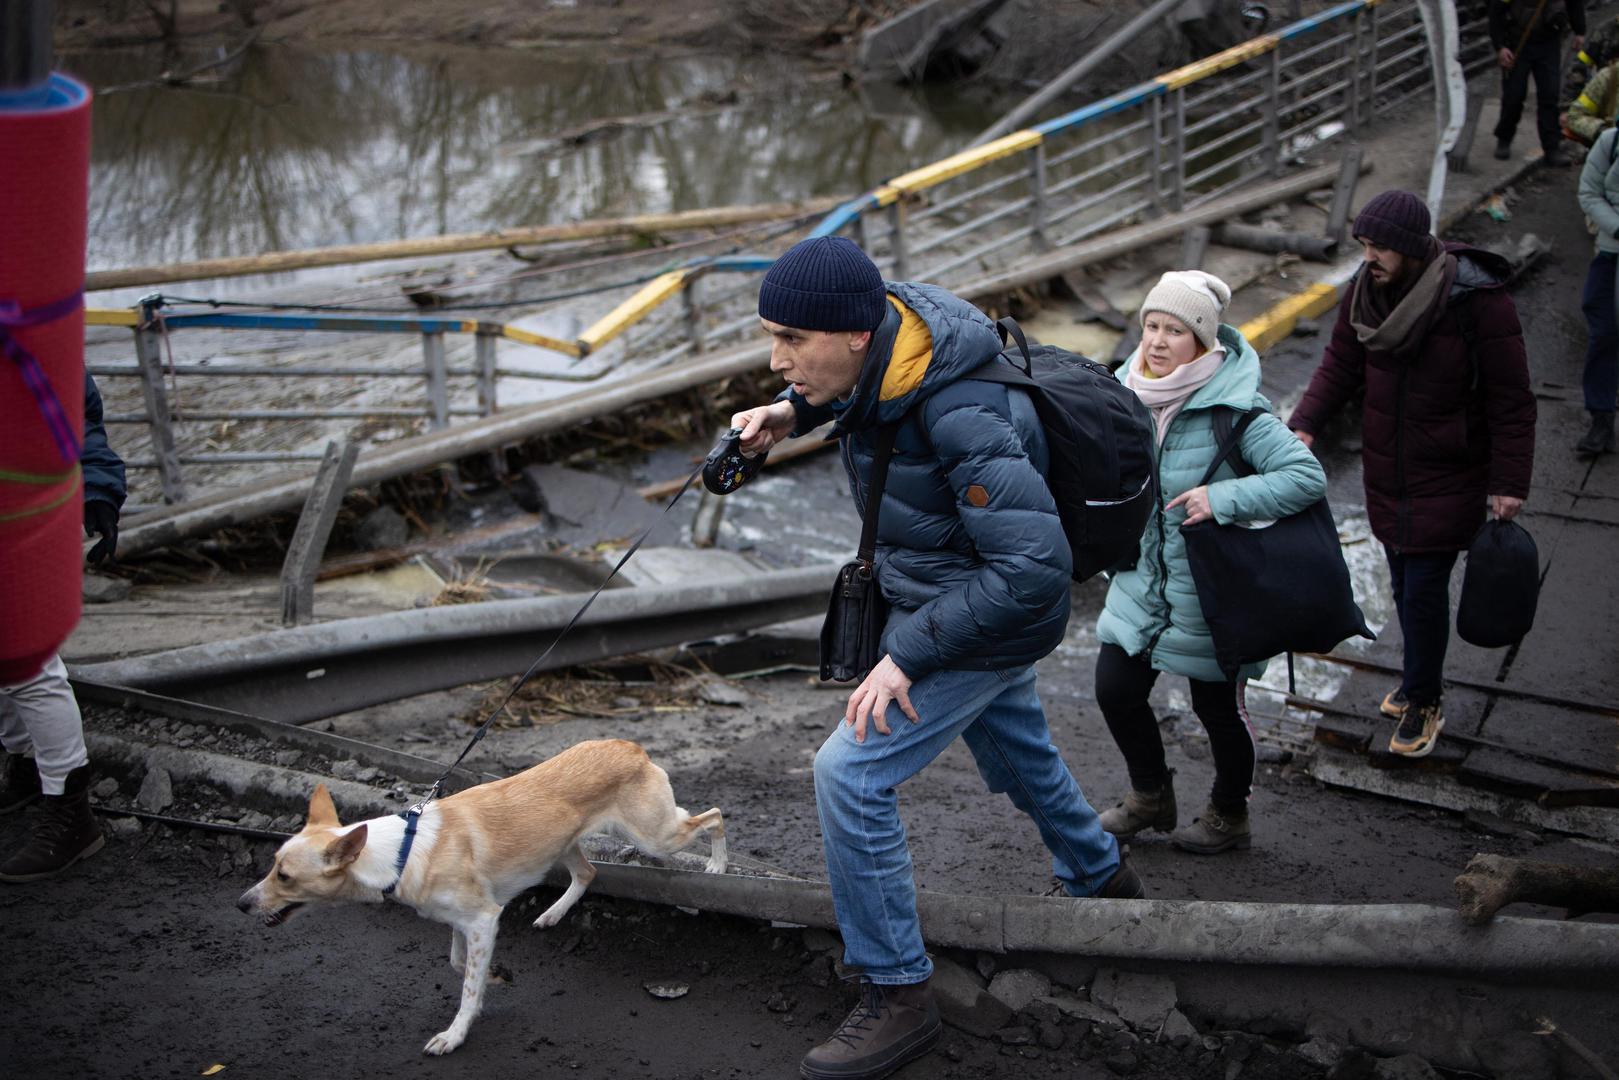 People cross a destroyed bridge as they evacuate the city of Irpin, northwest of Kyiv, during heavy shelling and bombing on March 5, 2022, 10 days after Russia launched a military invasion on Ukraine. Photo by Raphael Lafargue/ABACAPRESS.COM